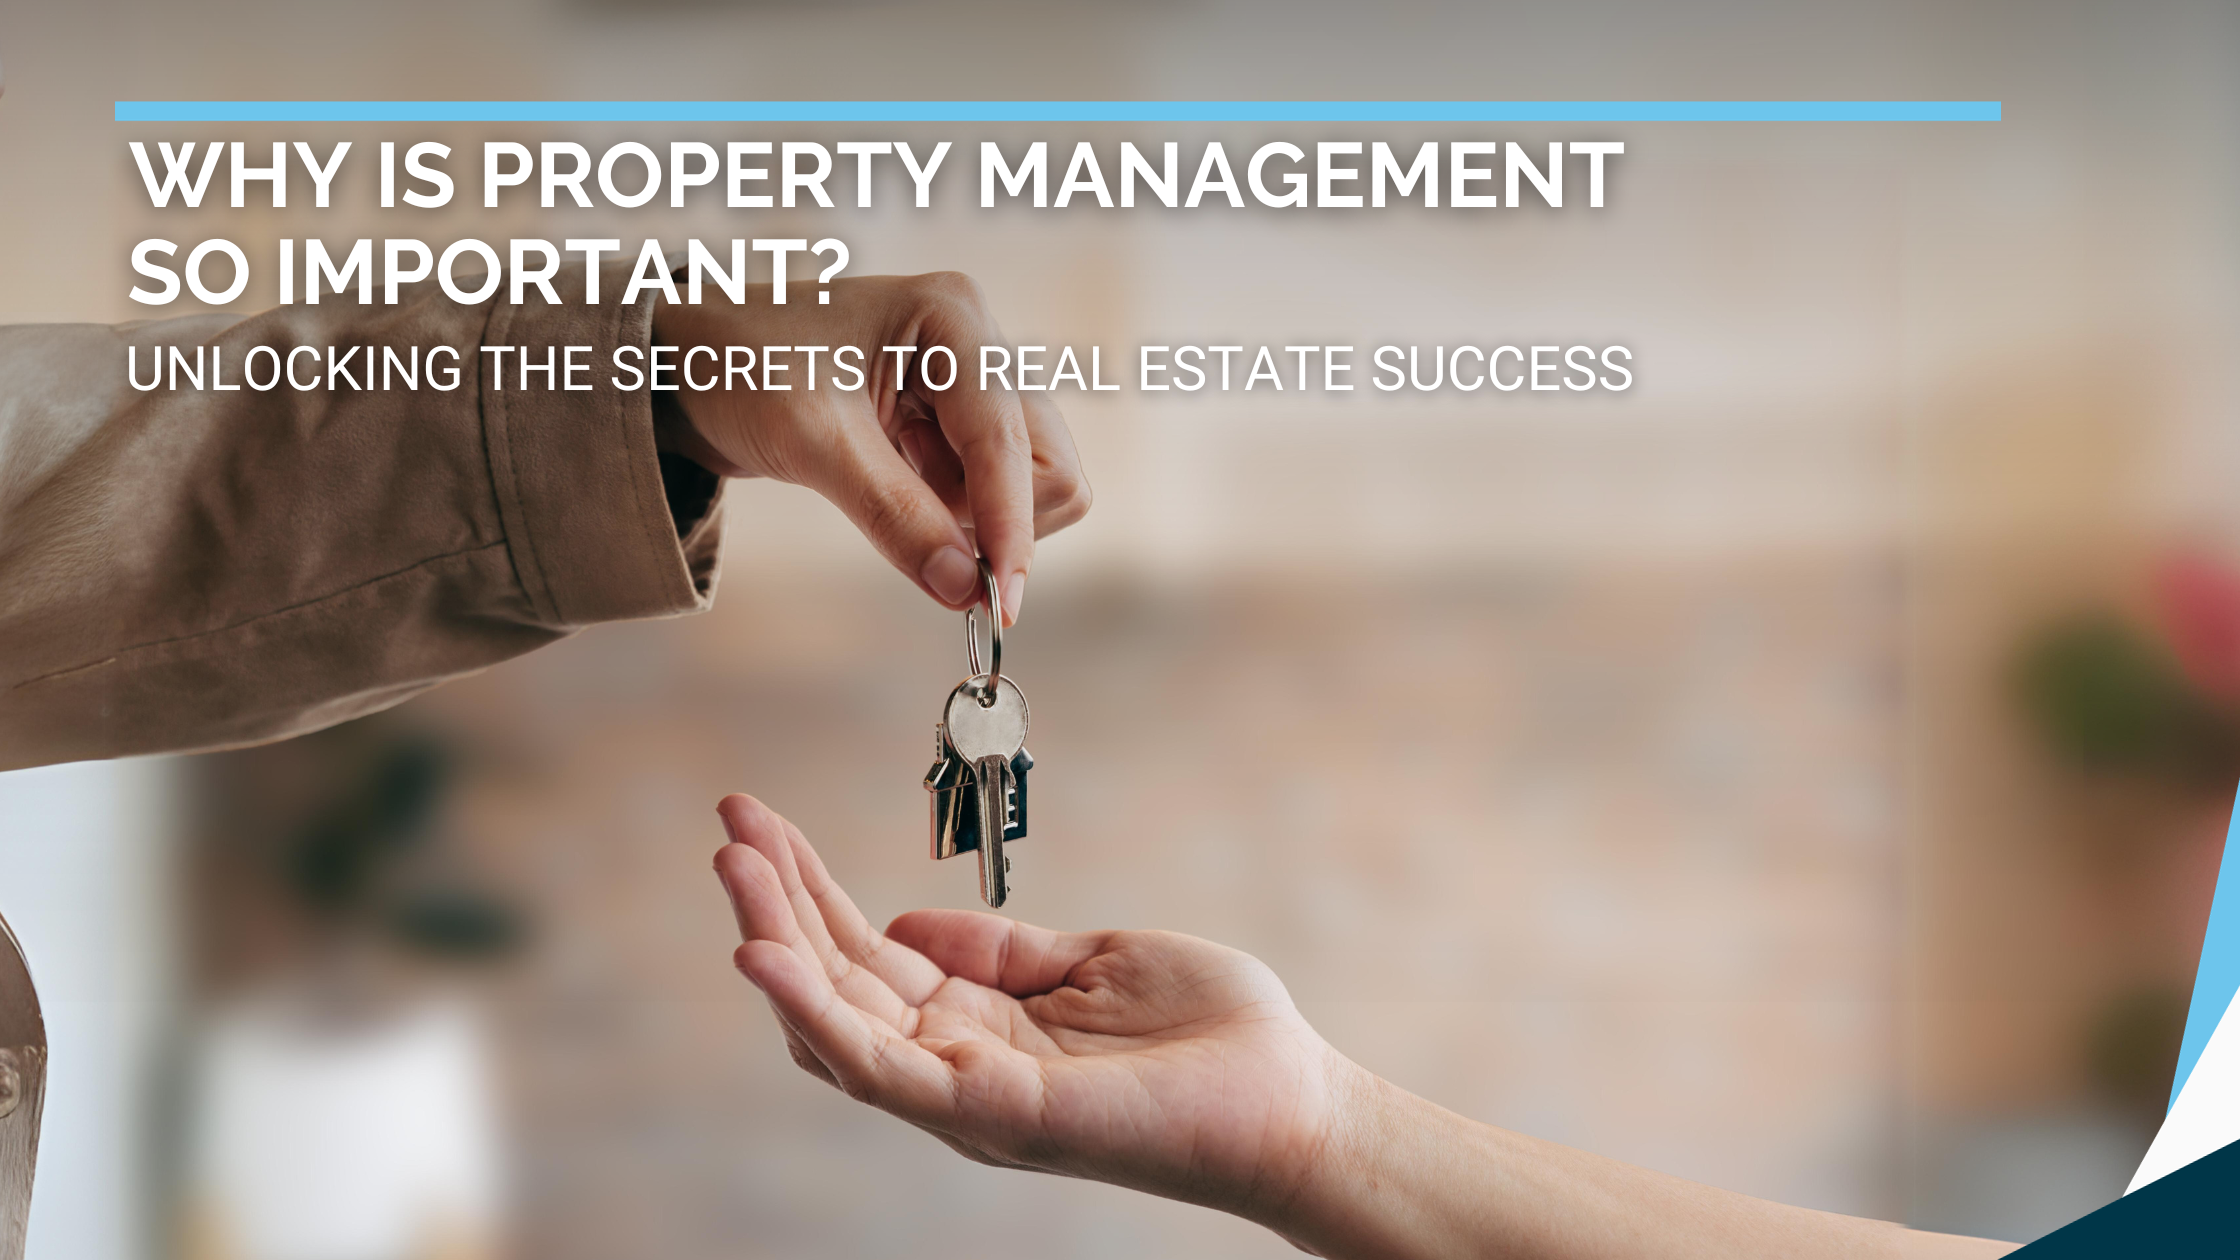 Why is Property Management So Important? Learn The Benefits For Better Real Estate Success